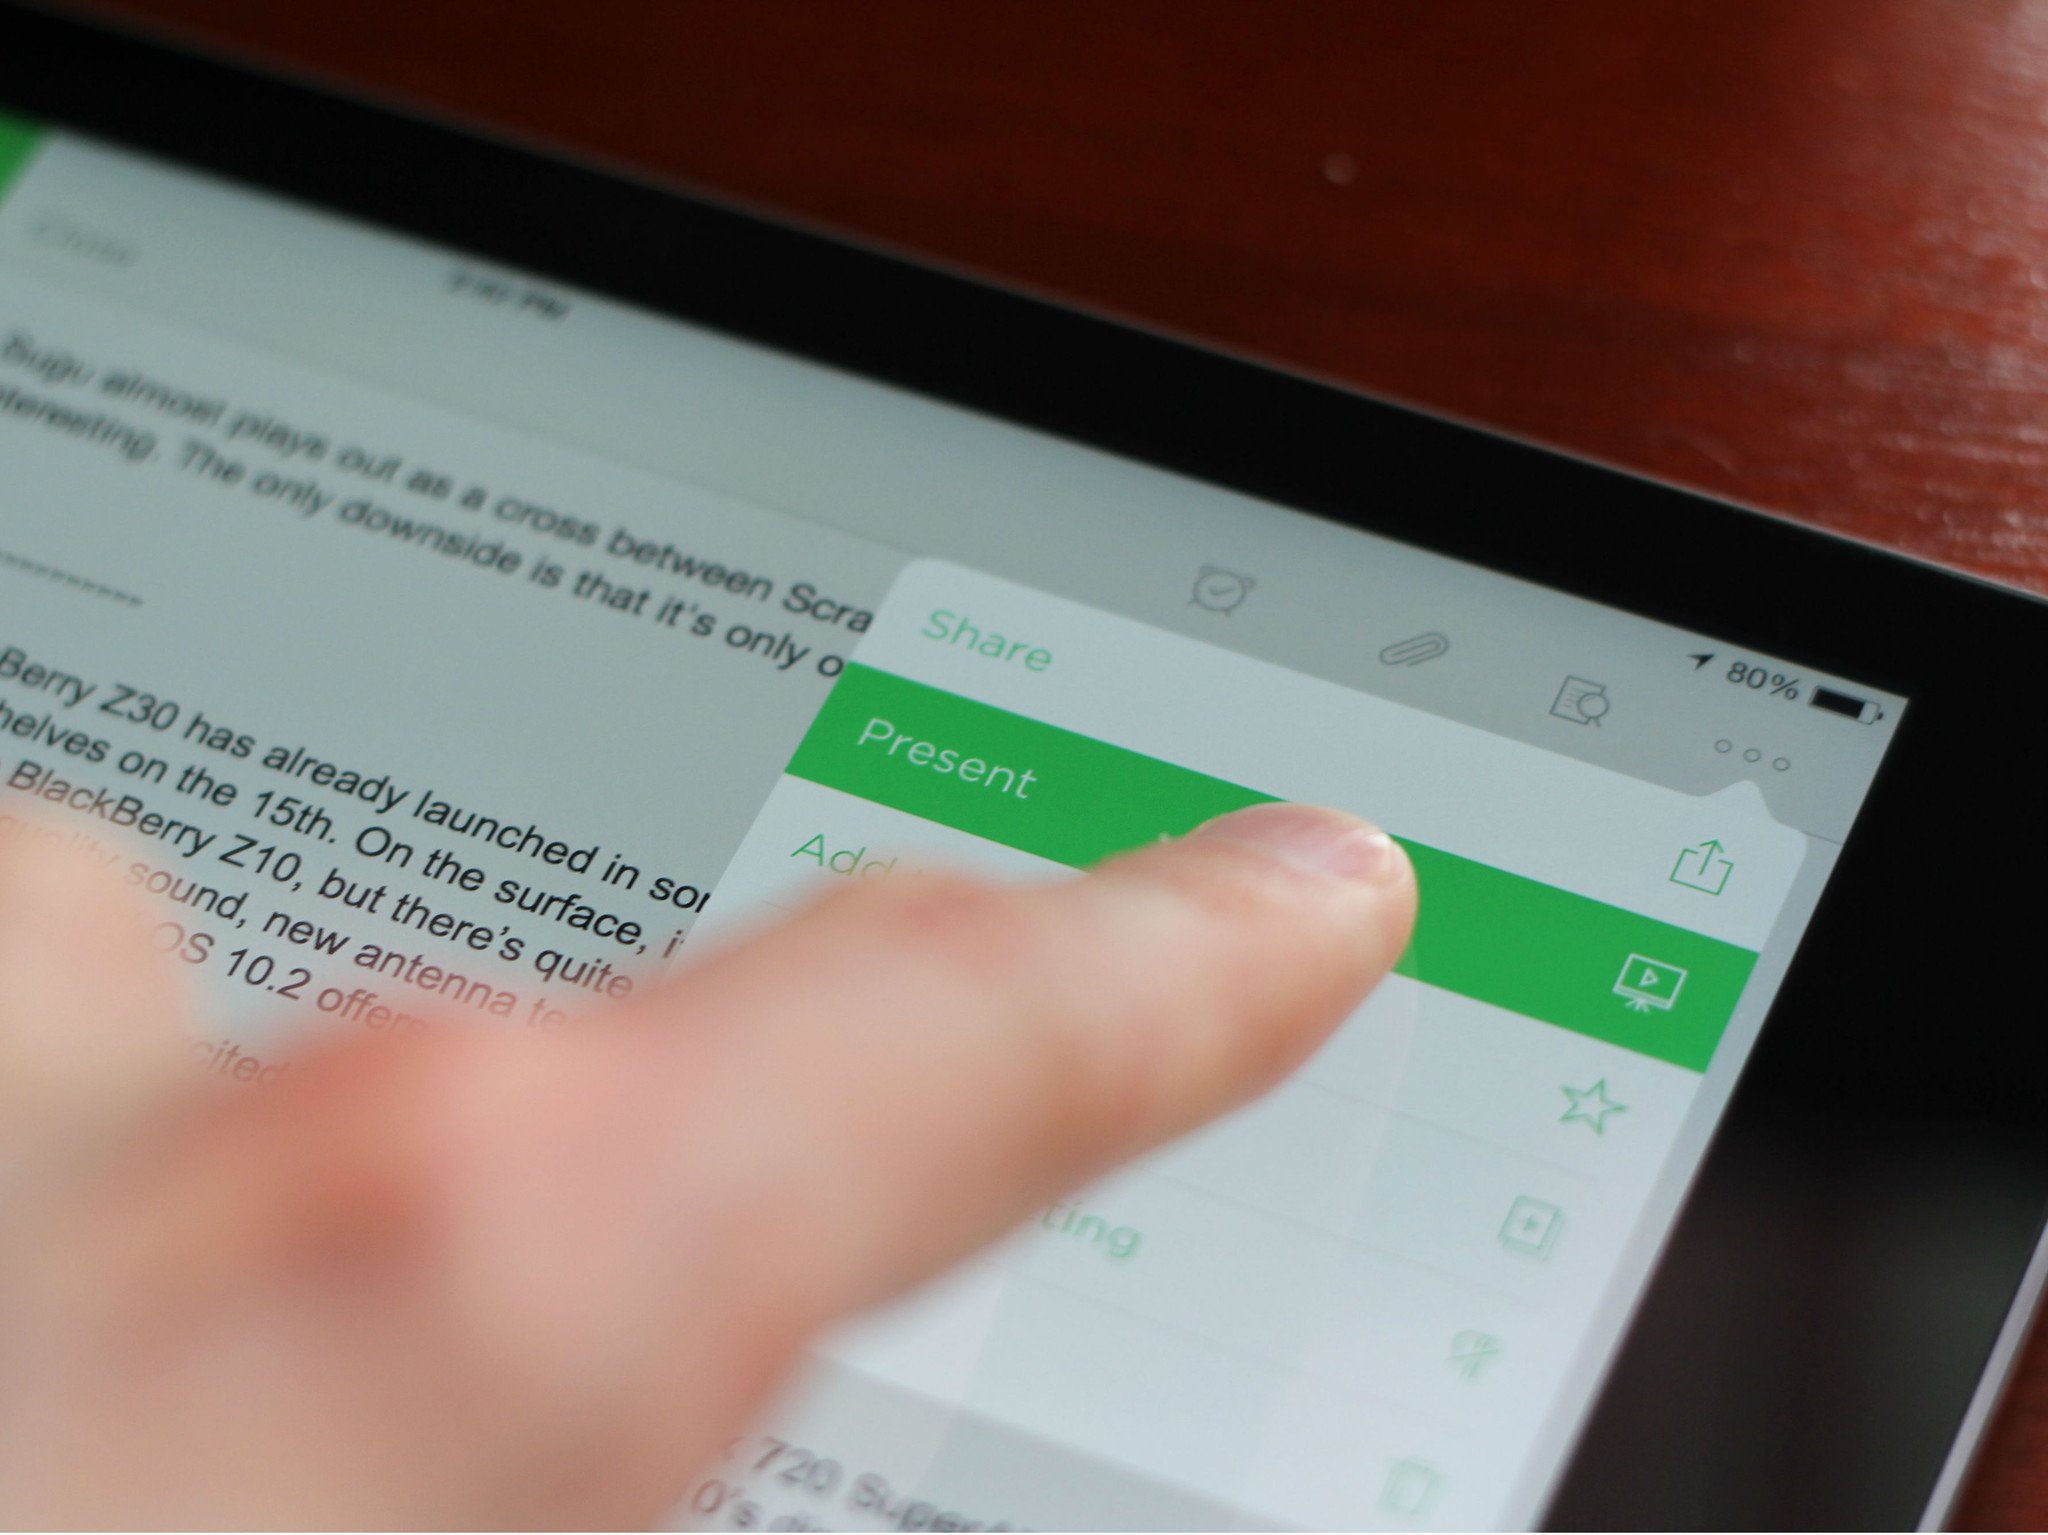 Evernote for iPad